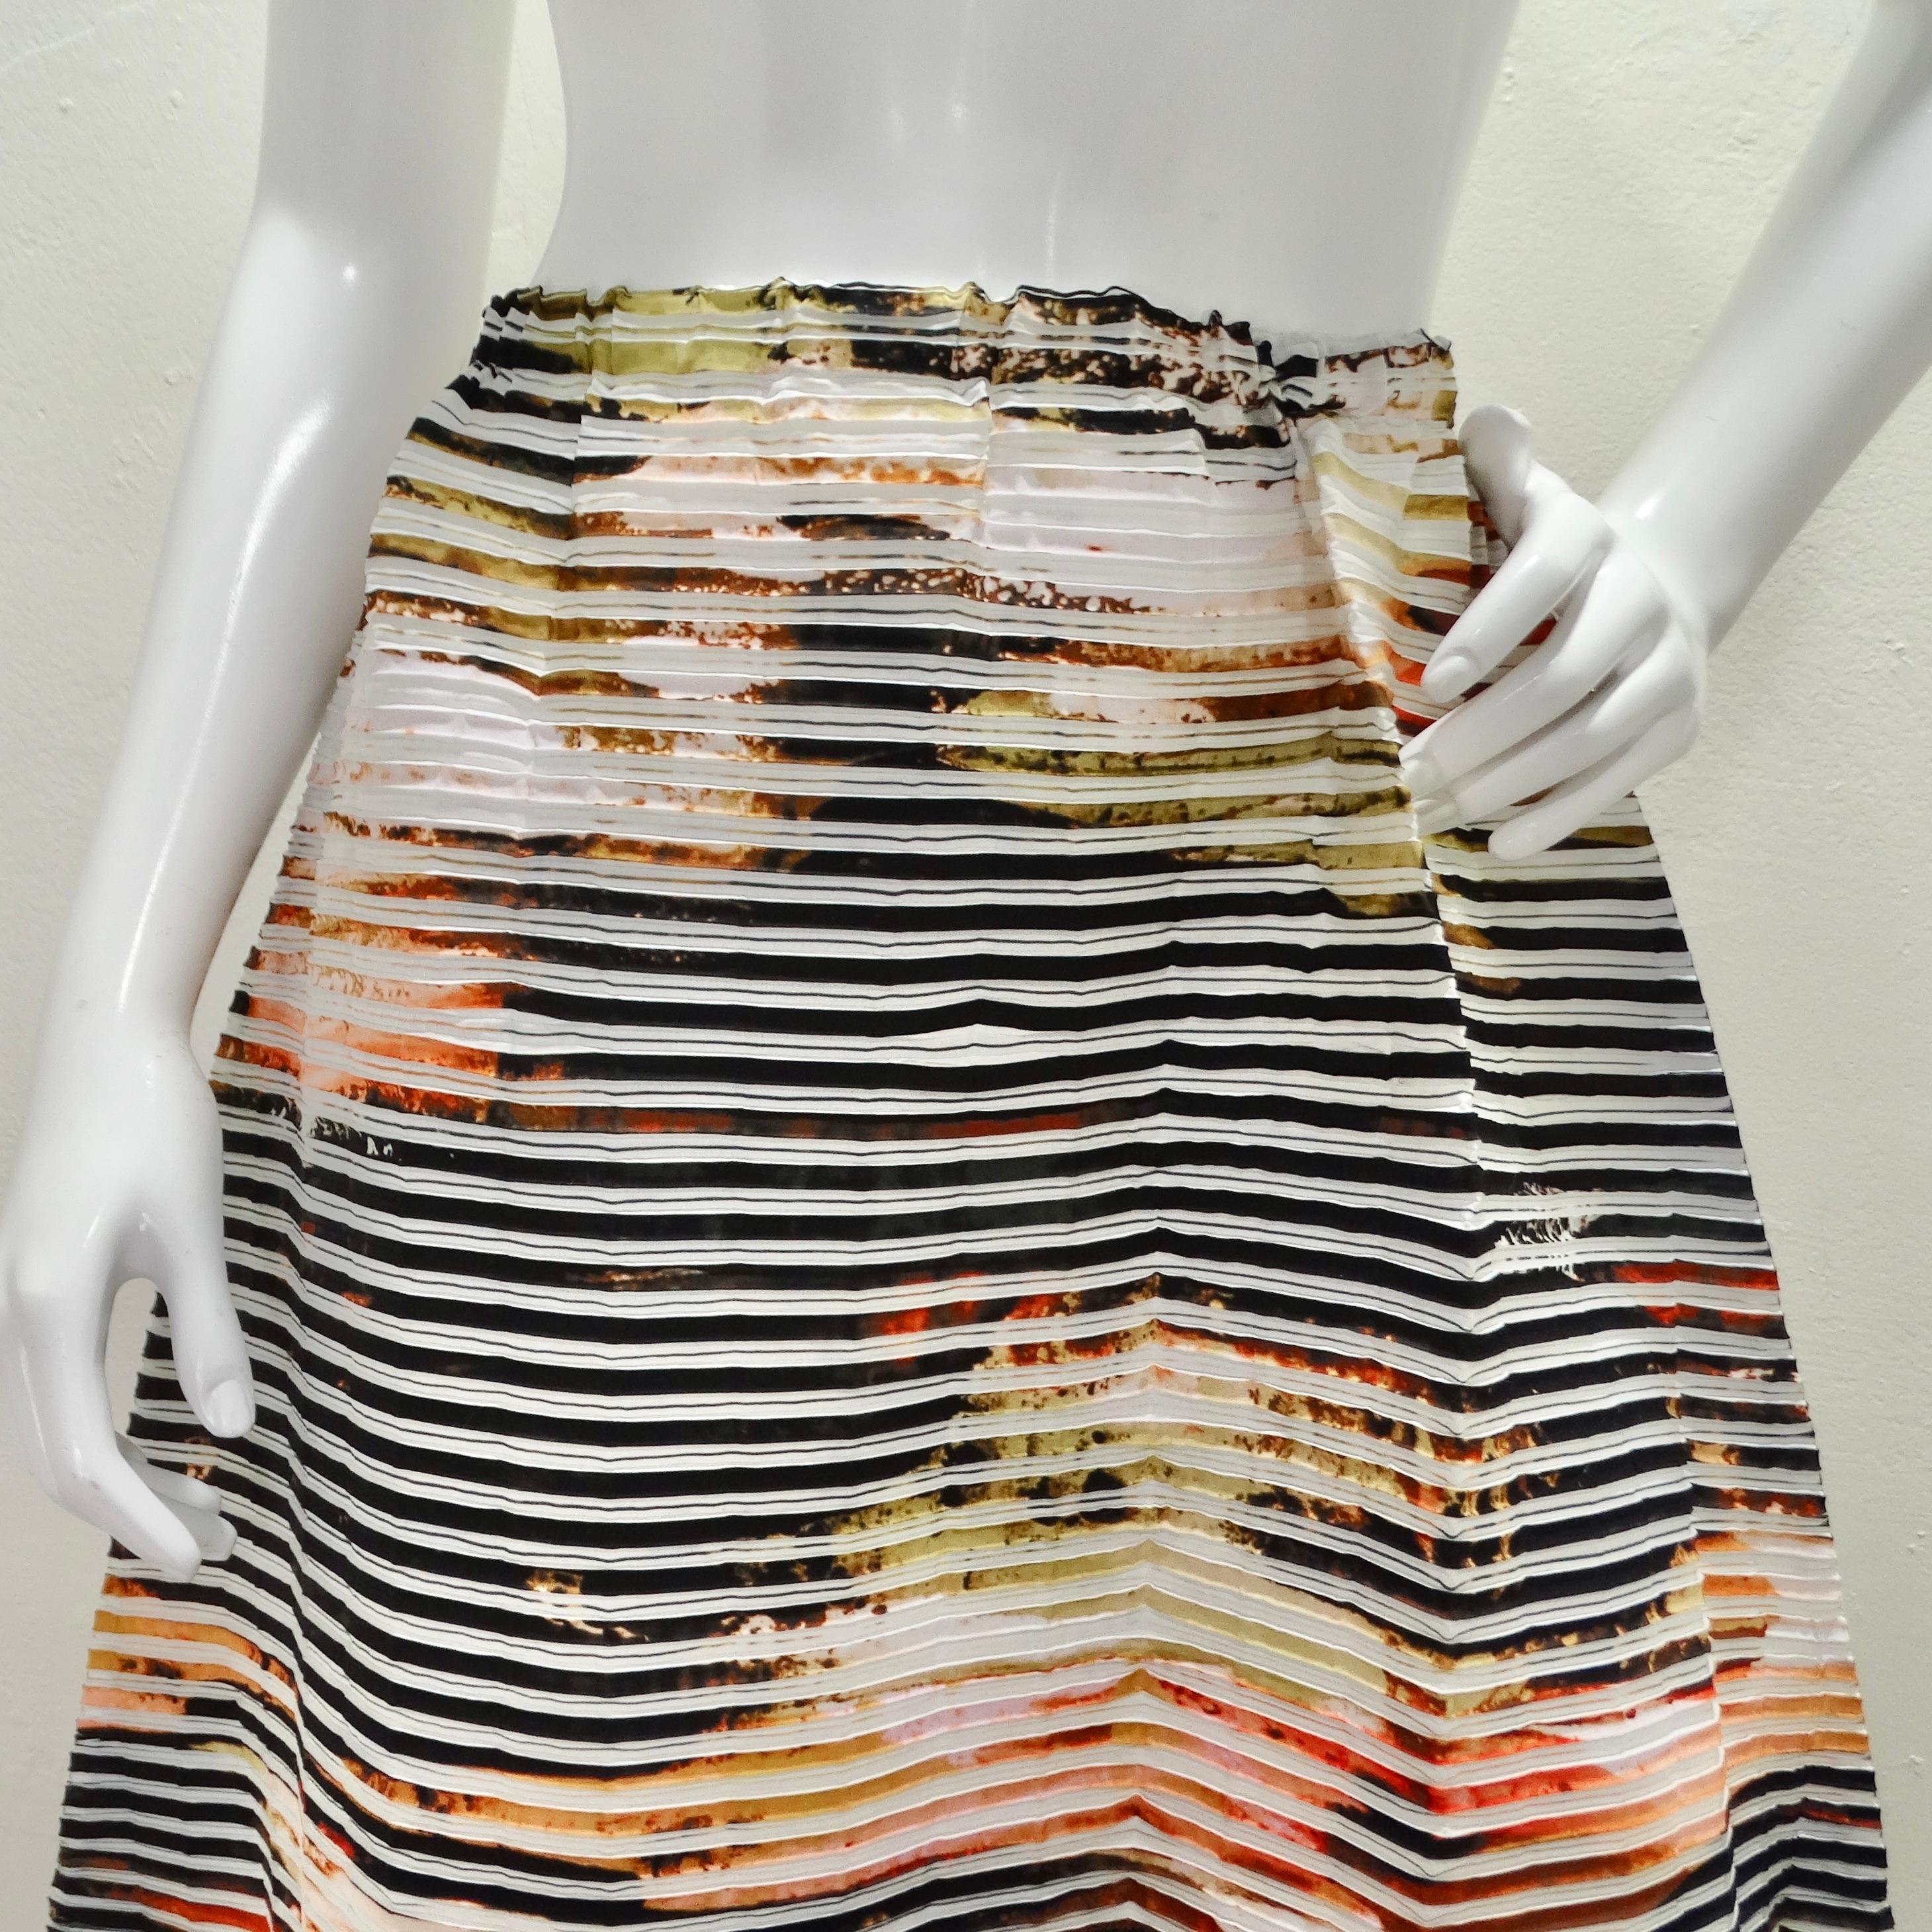 Issey Miyake Resort 2018 Pleated Skirt In Excellent Condition For Sale In Scottsdale, AZ